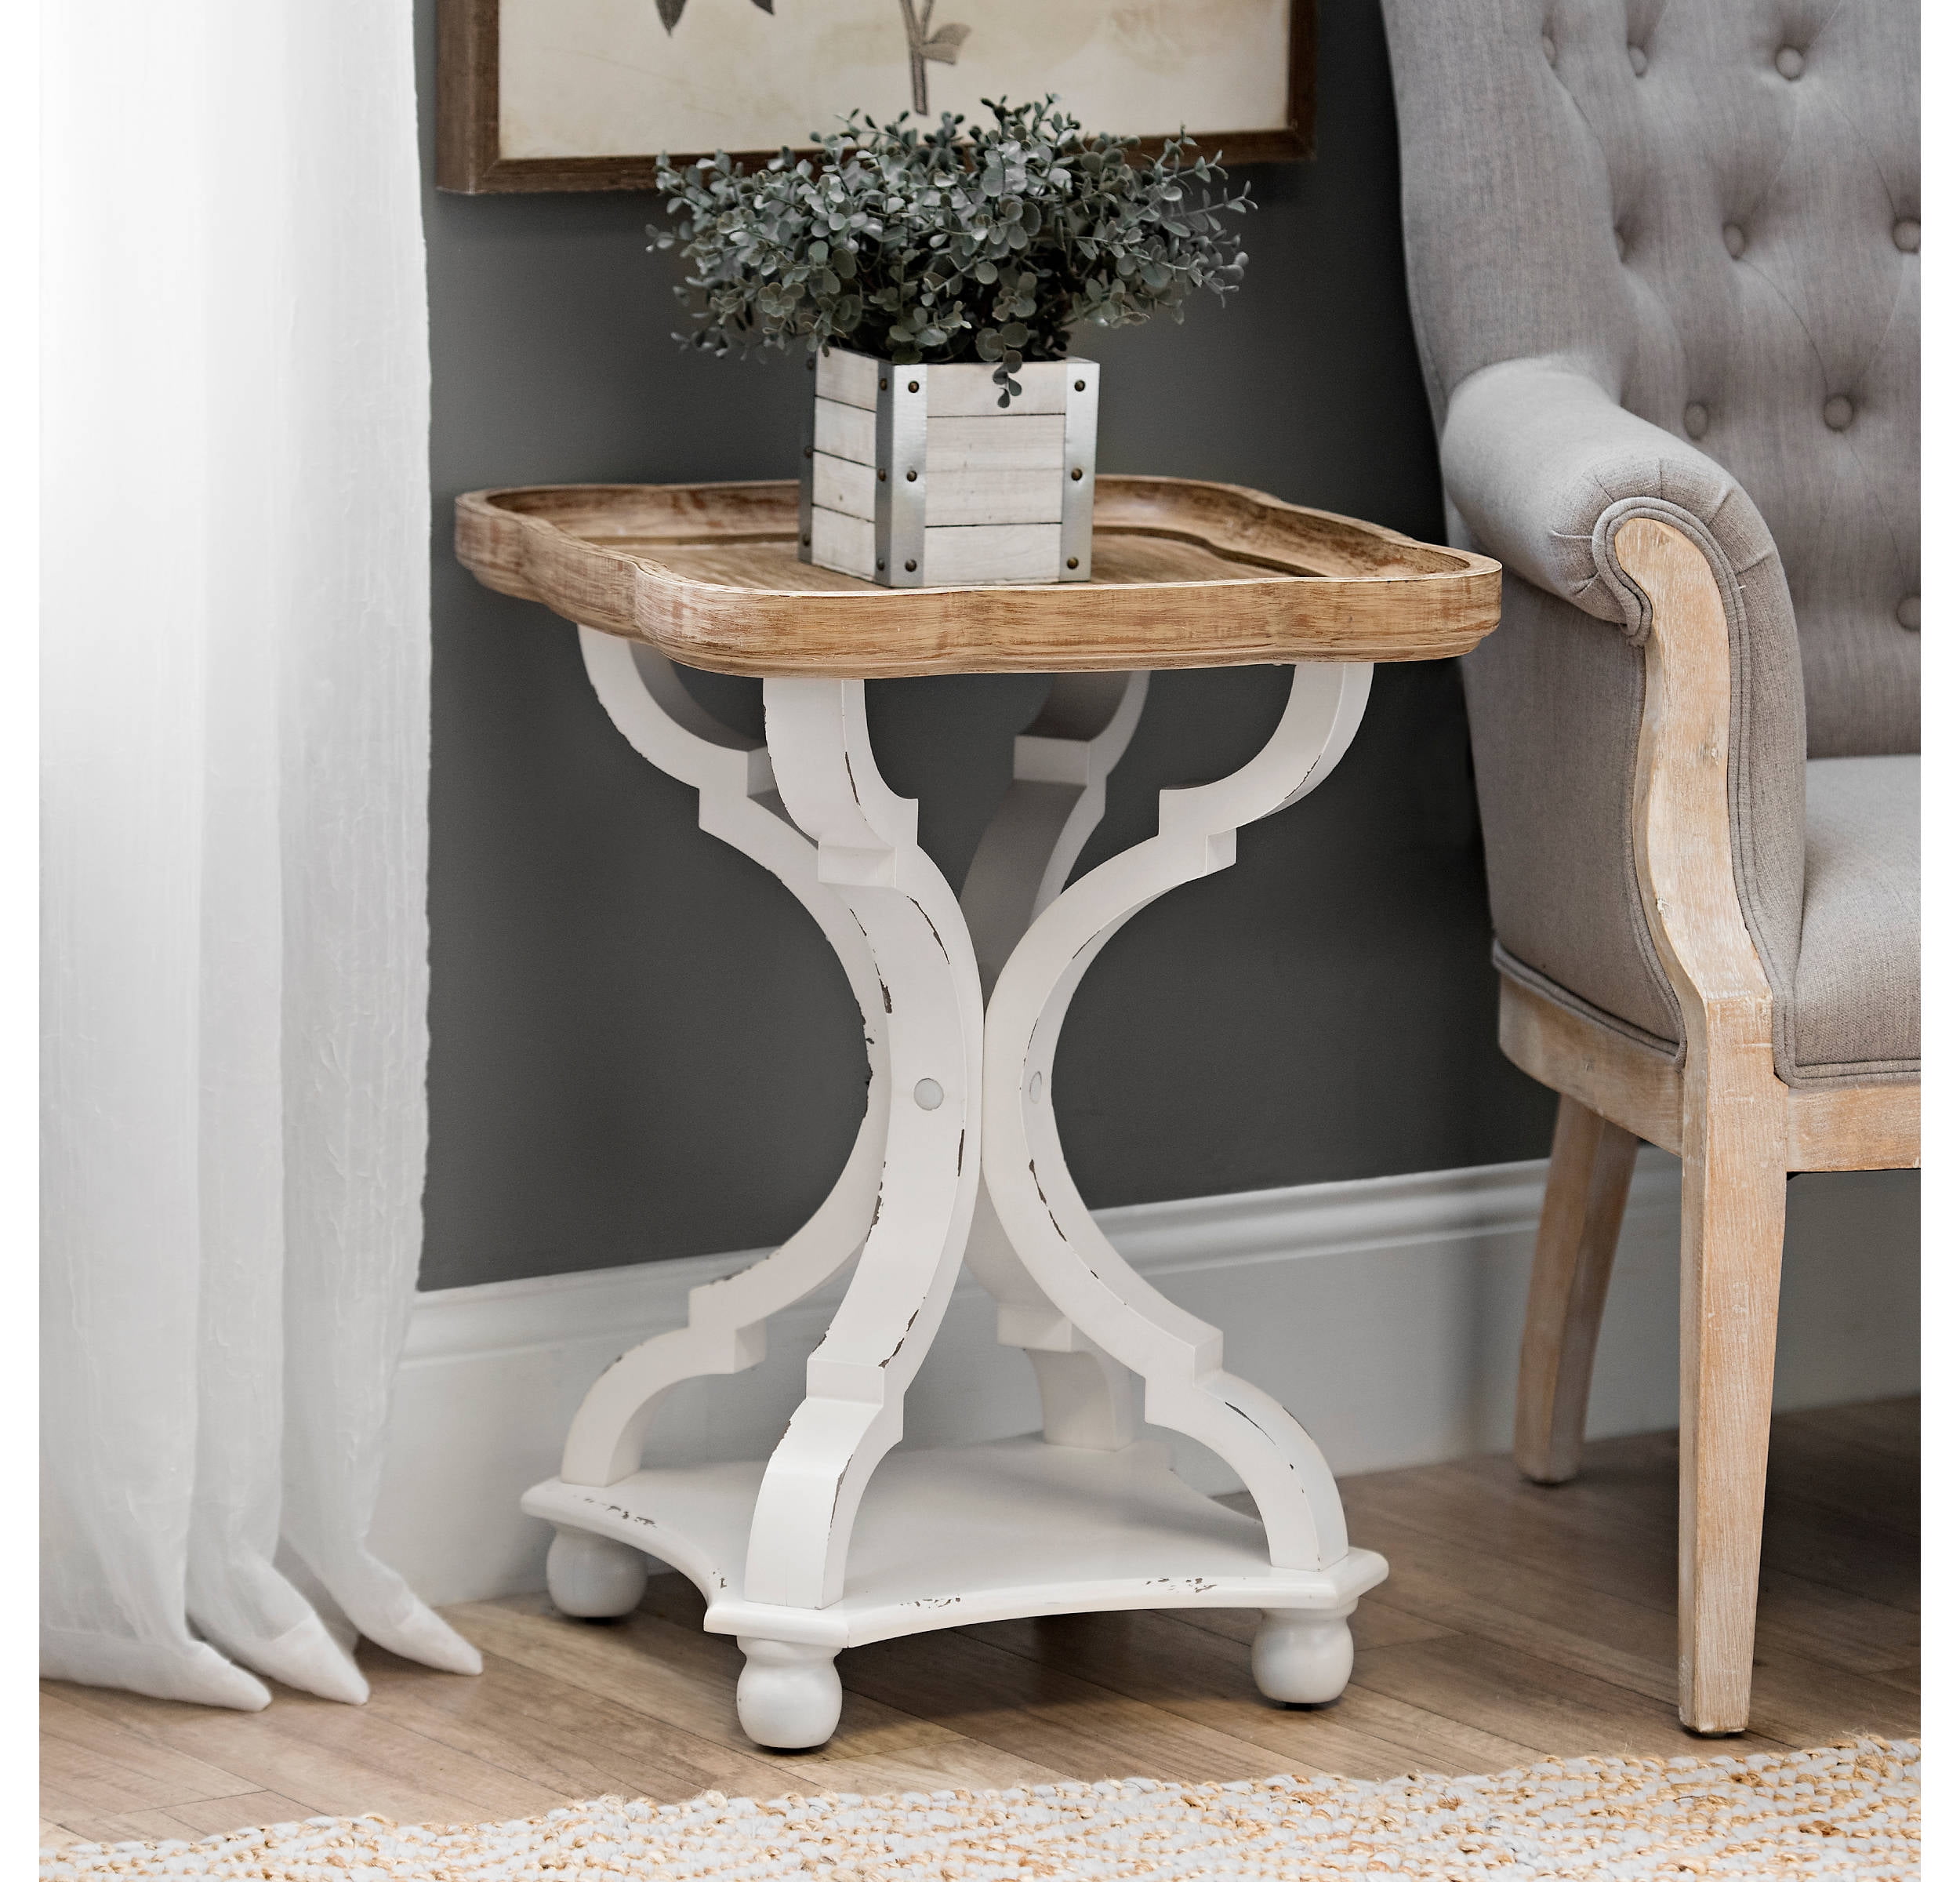 Details about   Rustic Barnwood Side Table Display Stand Reclaimed Look Distressed White/Brown 